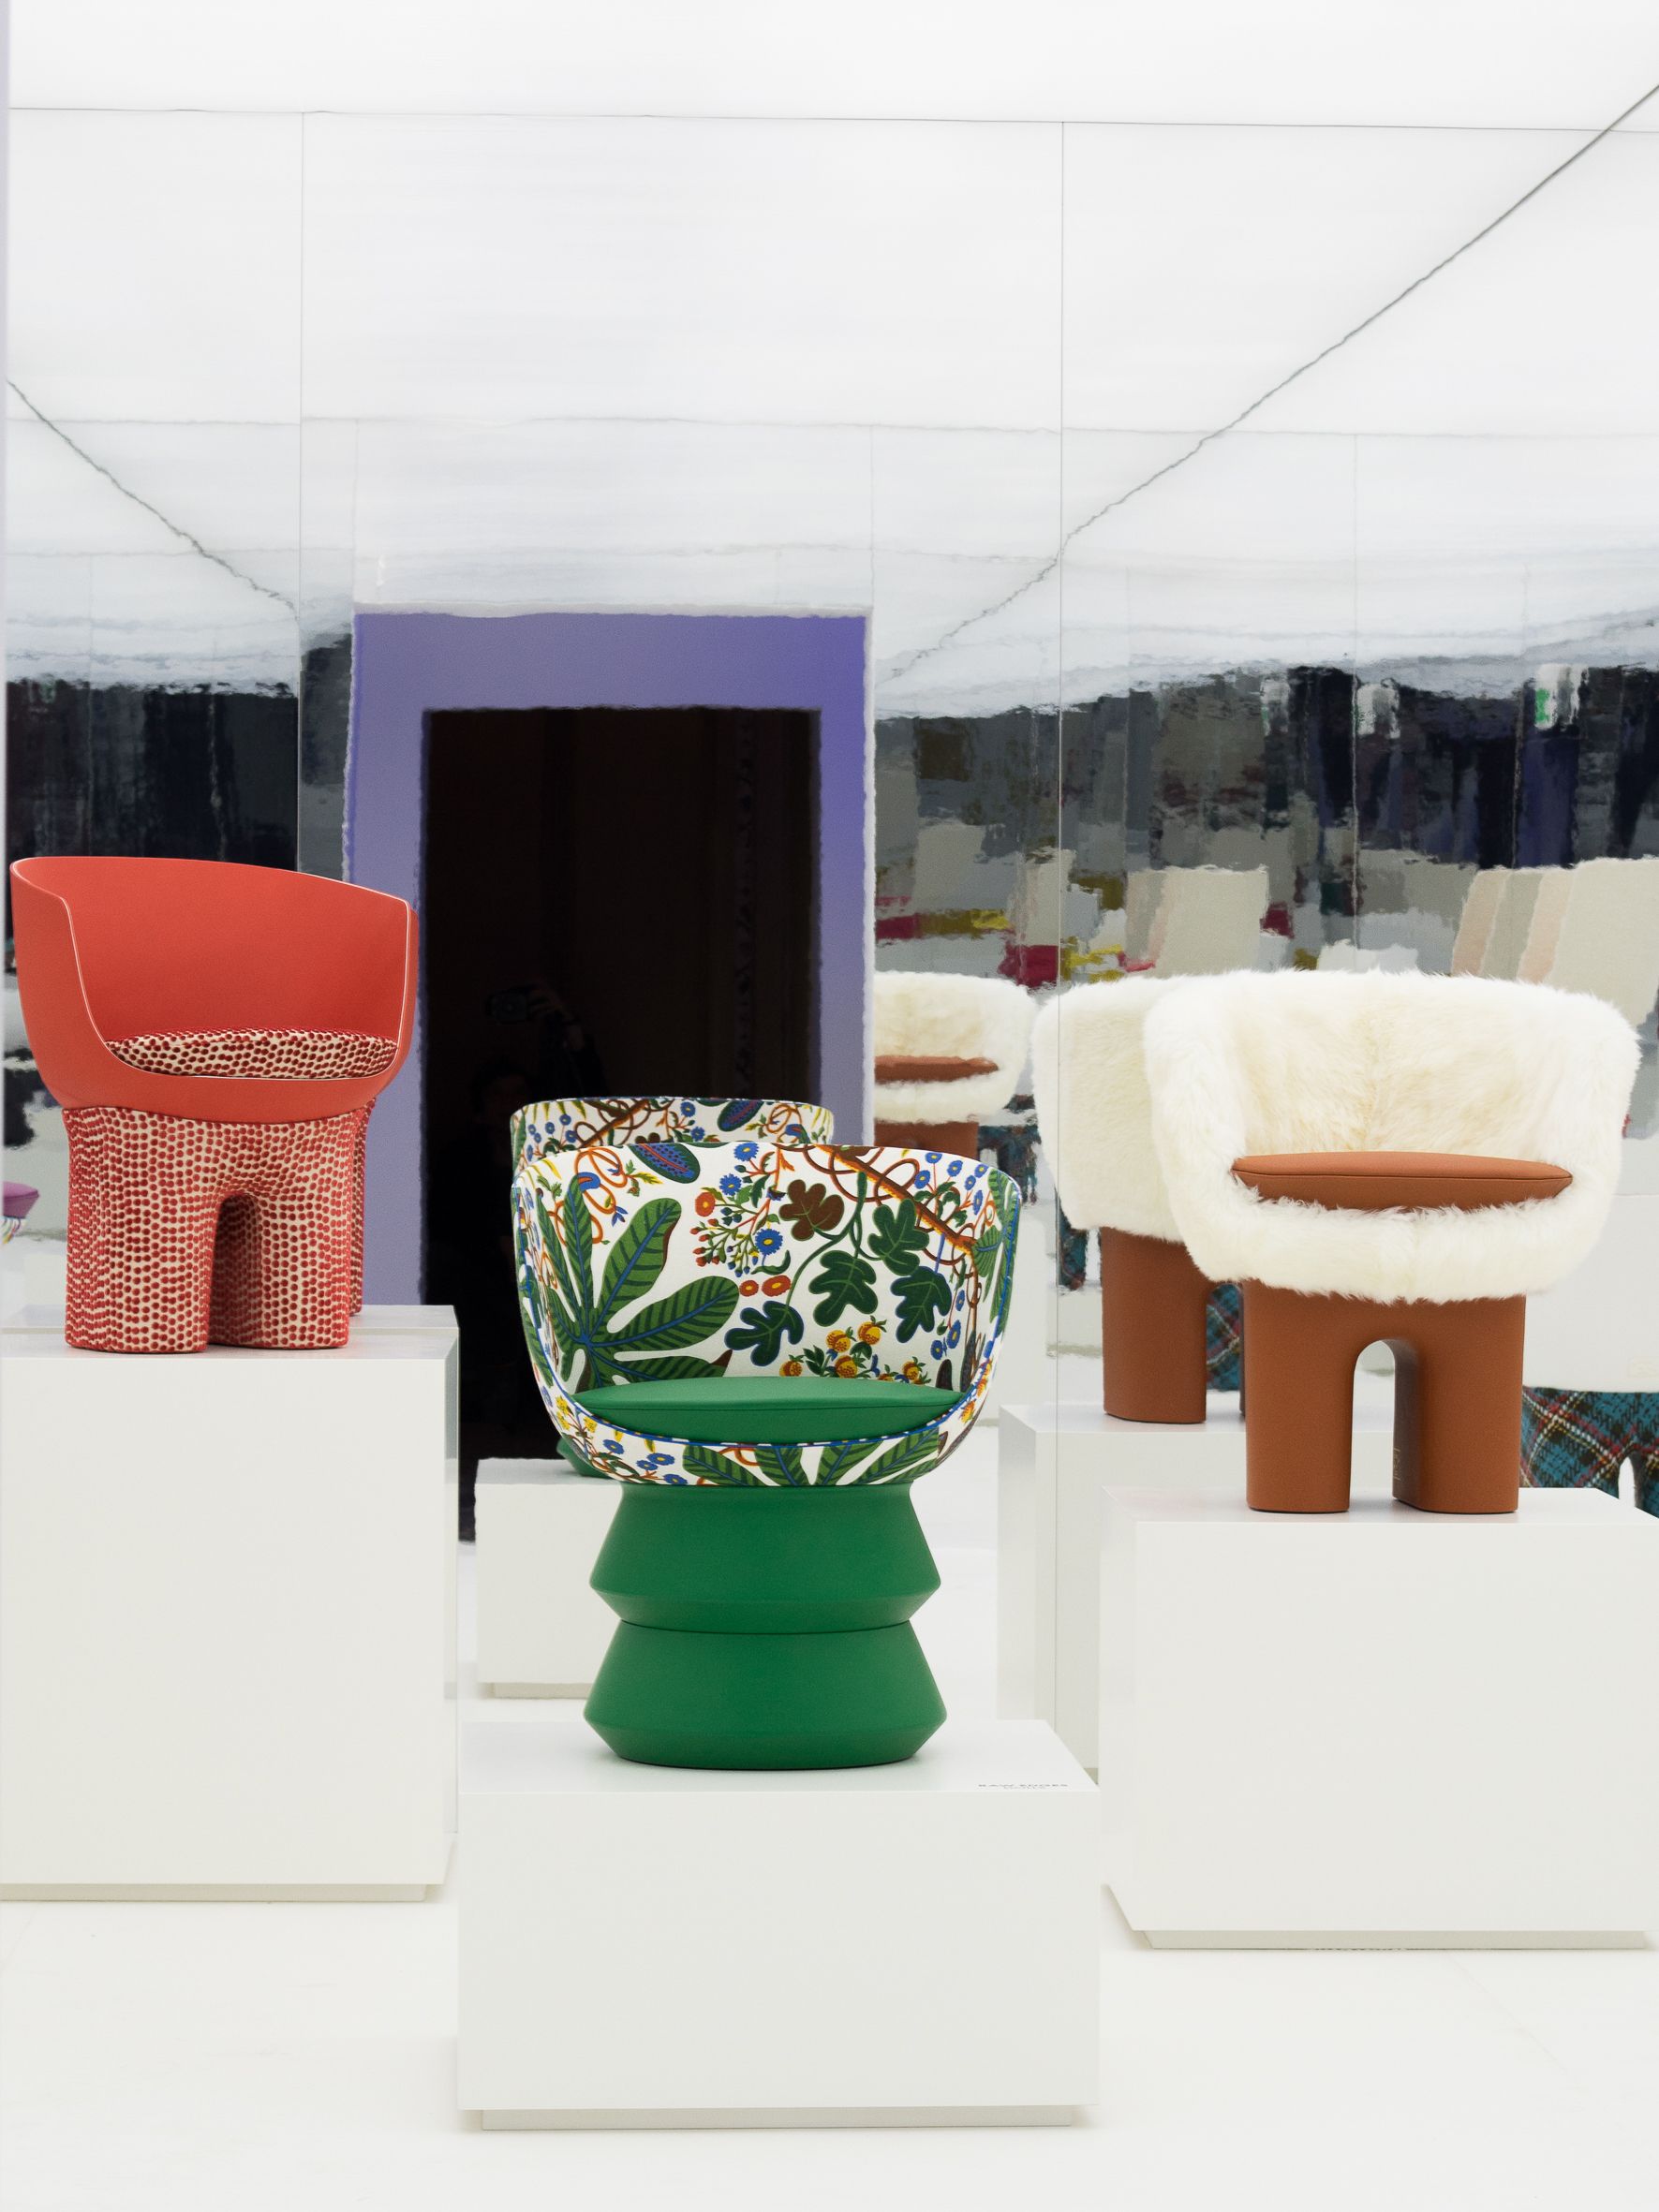 Objets Nomades by Louis Vuitton at Fuorisalone, in 10 pictures - Domus